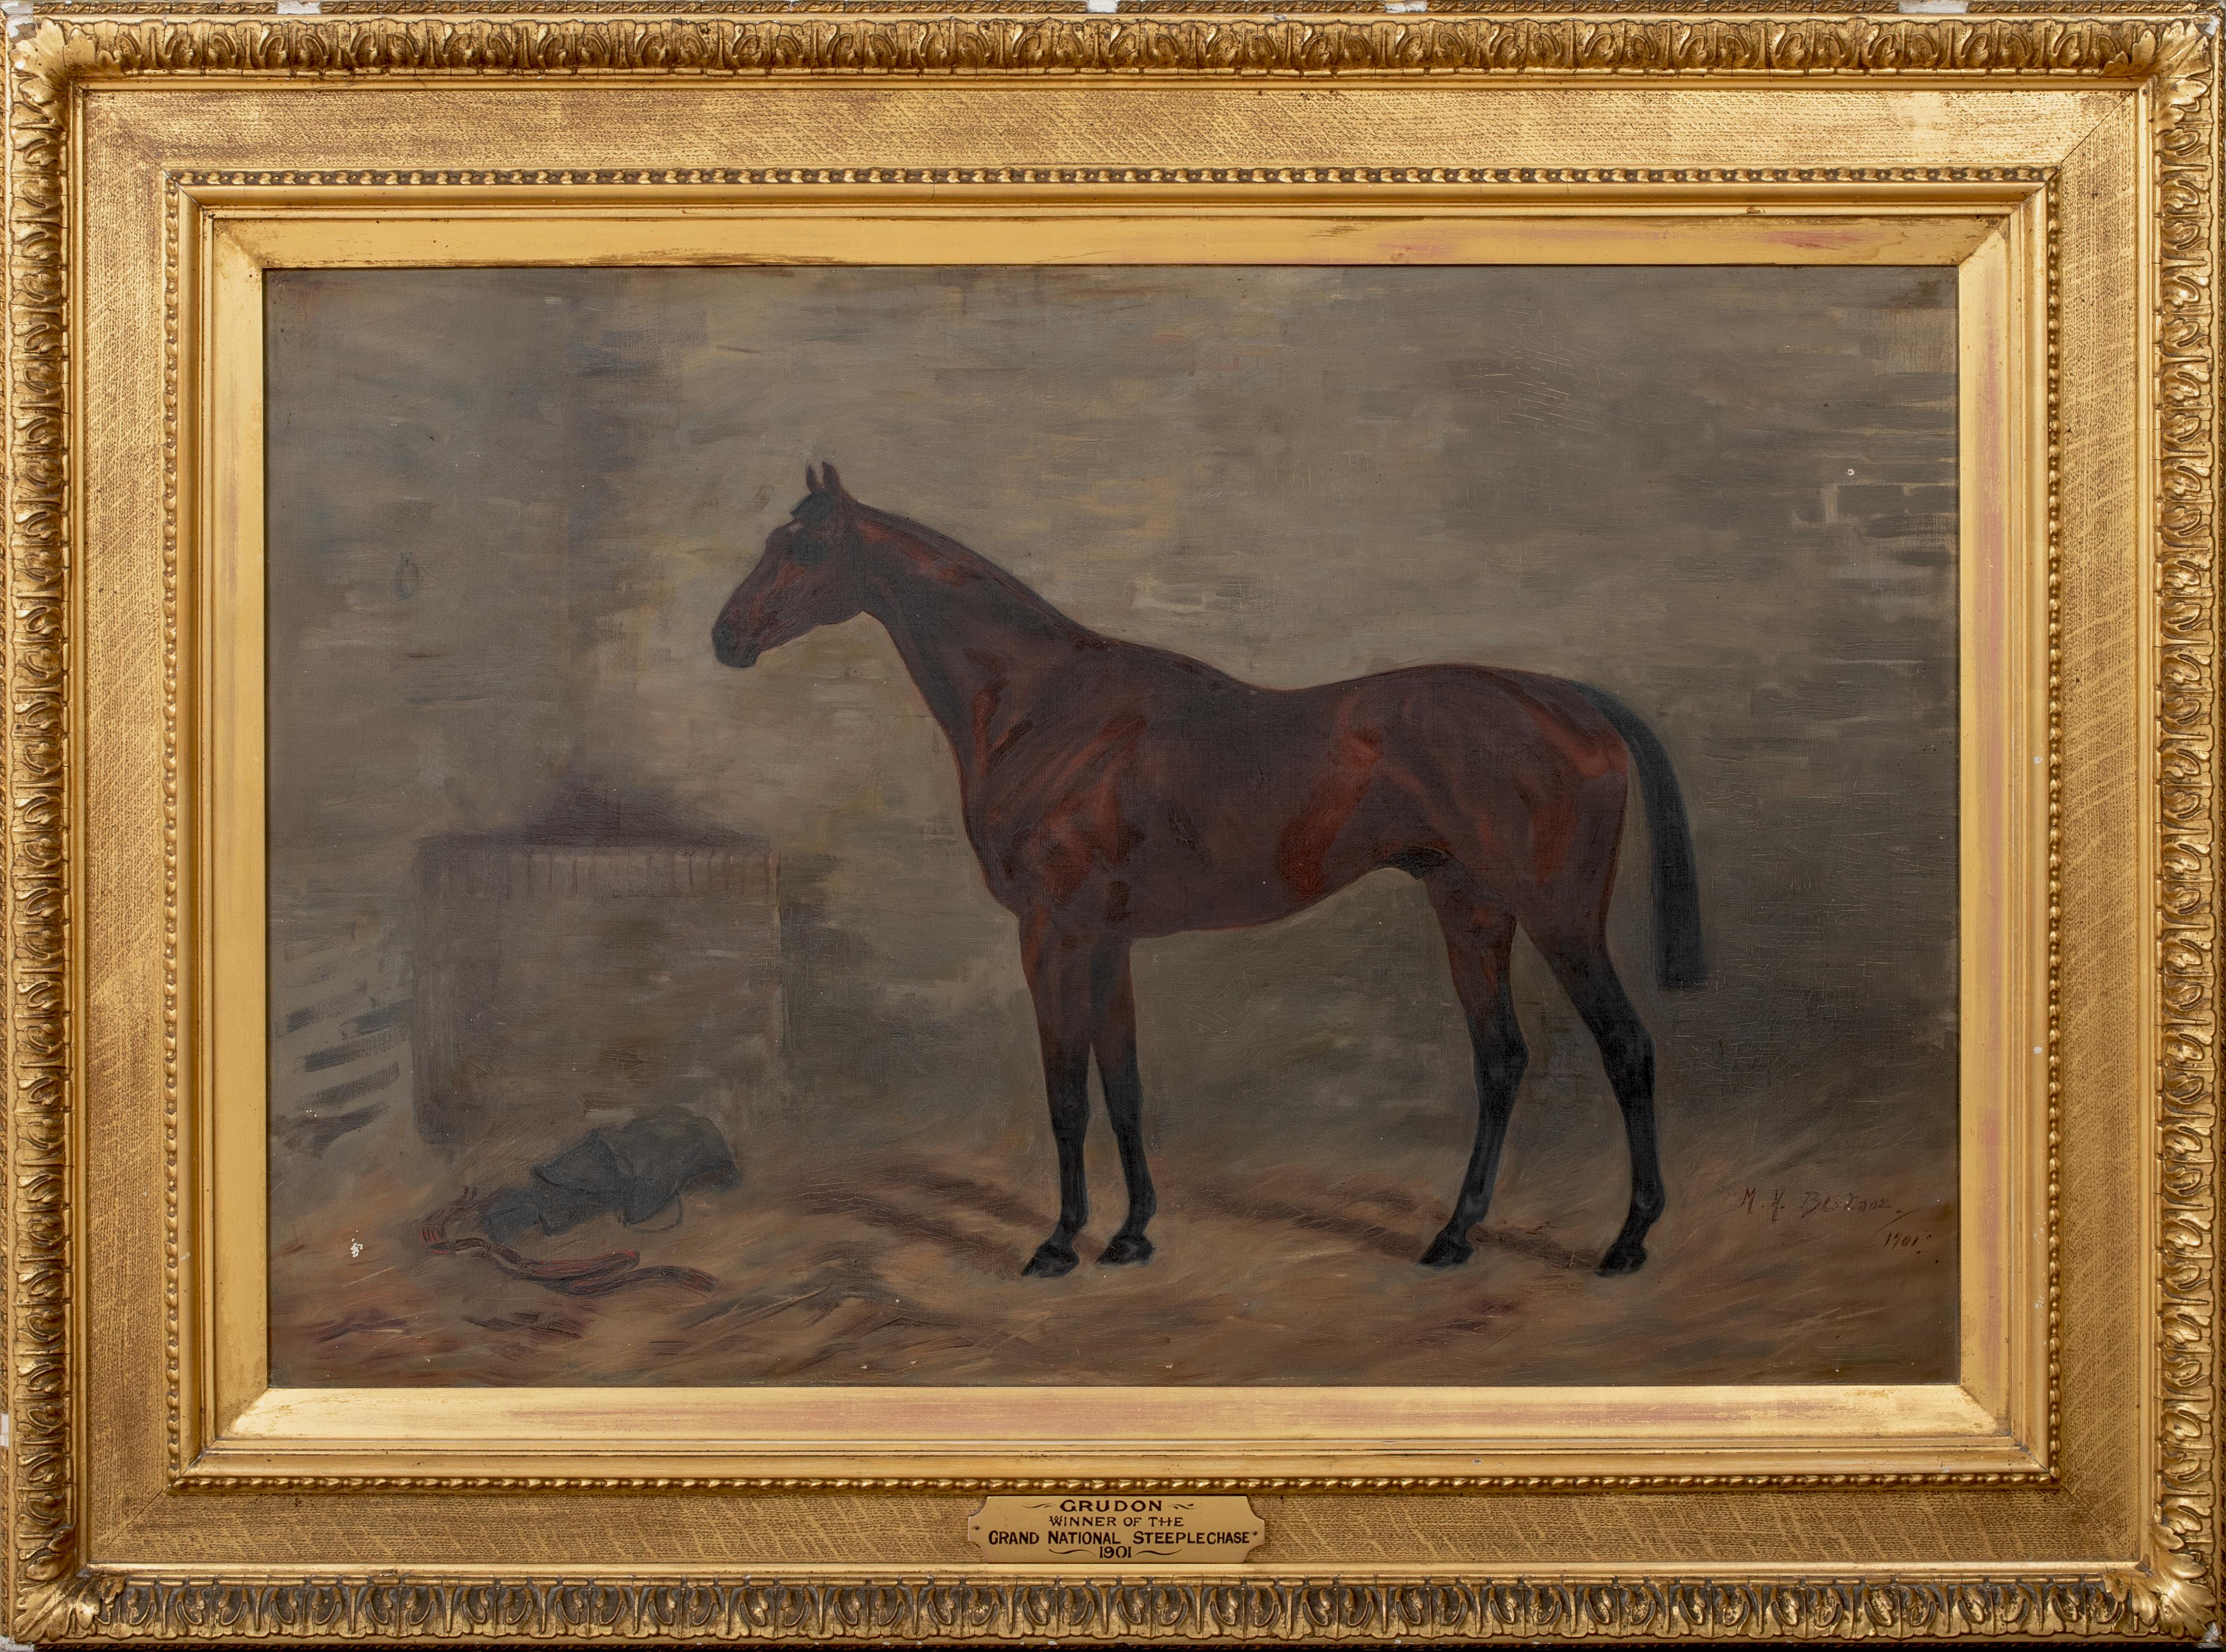 Unknown Portrait Painting - Portrait Of 1901 Grand National Winner "Grudon", 19th Century  